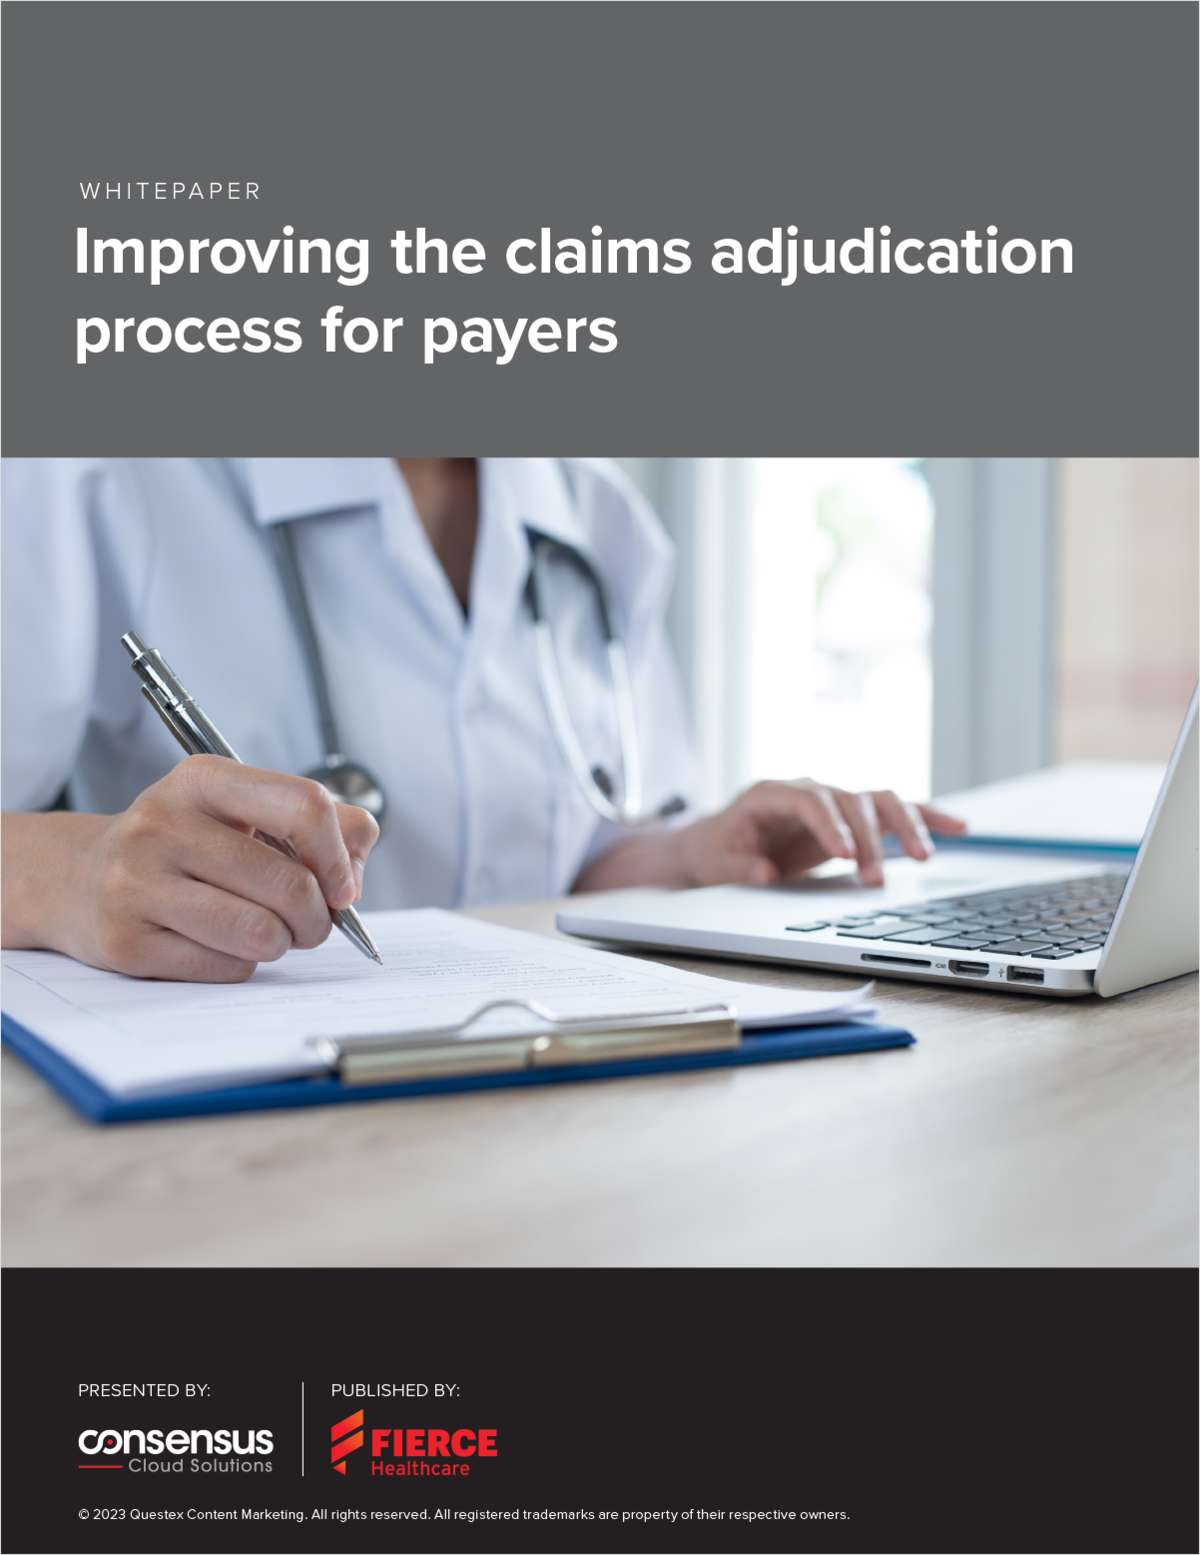 Improving the claims adjudication process for payers